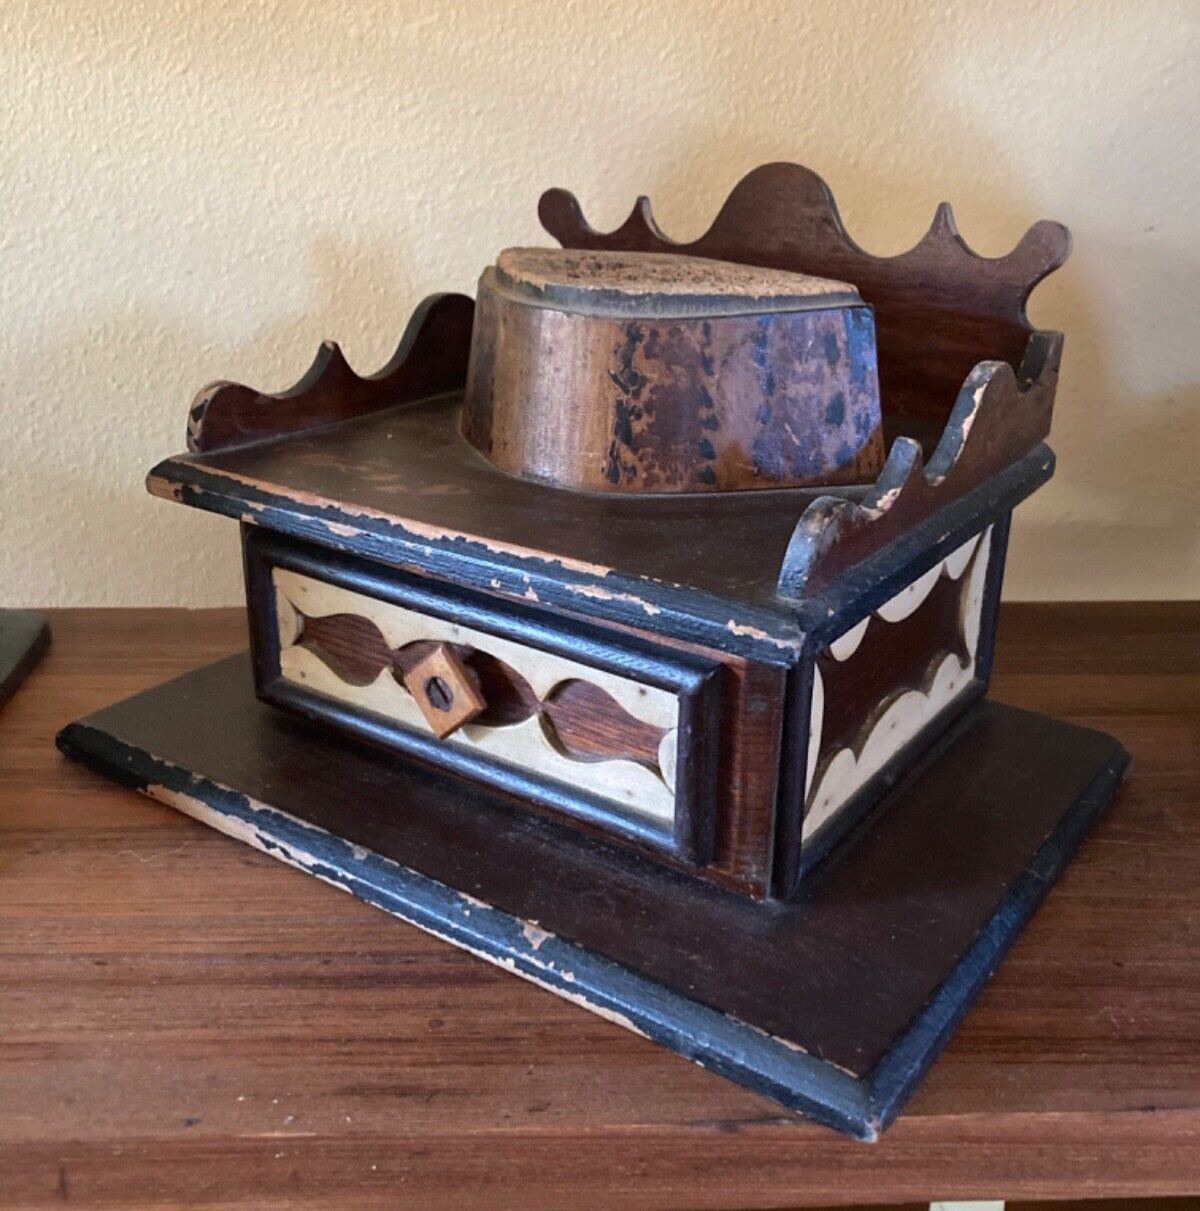 ANTIQUE TRAMP ART SEWING BOX WITH CORK PIN CUSHION